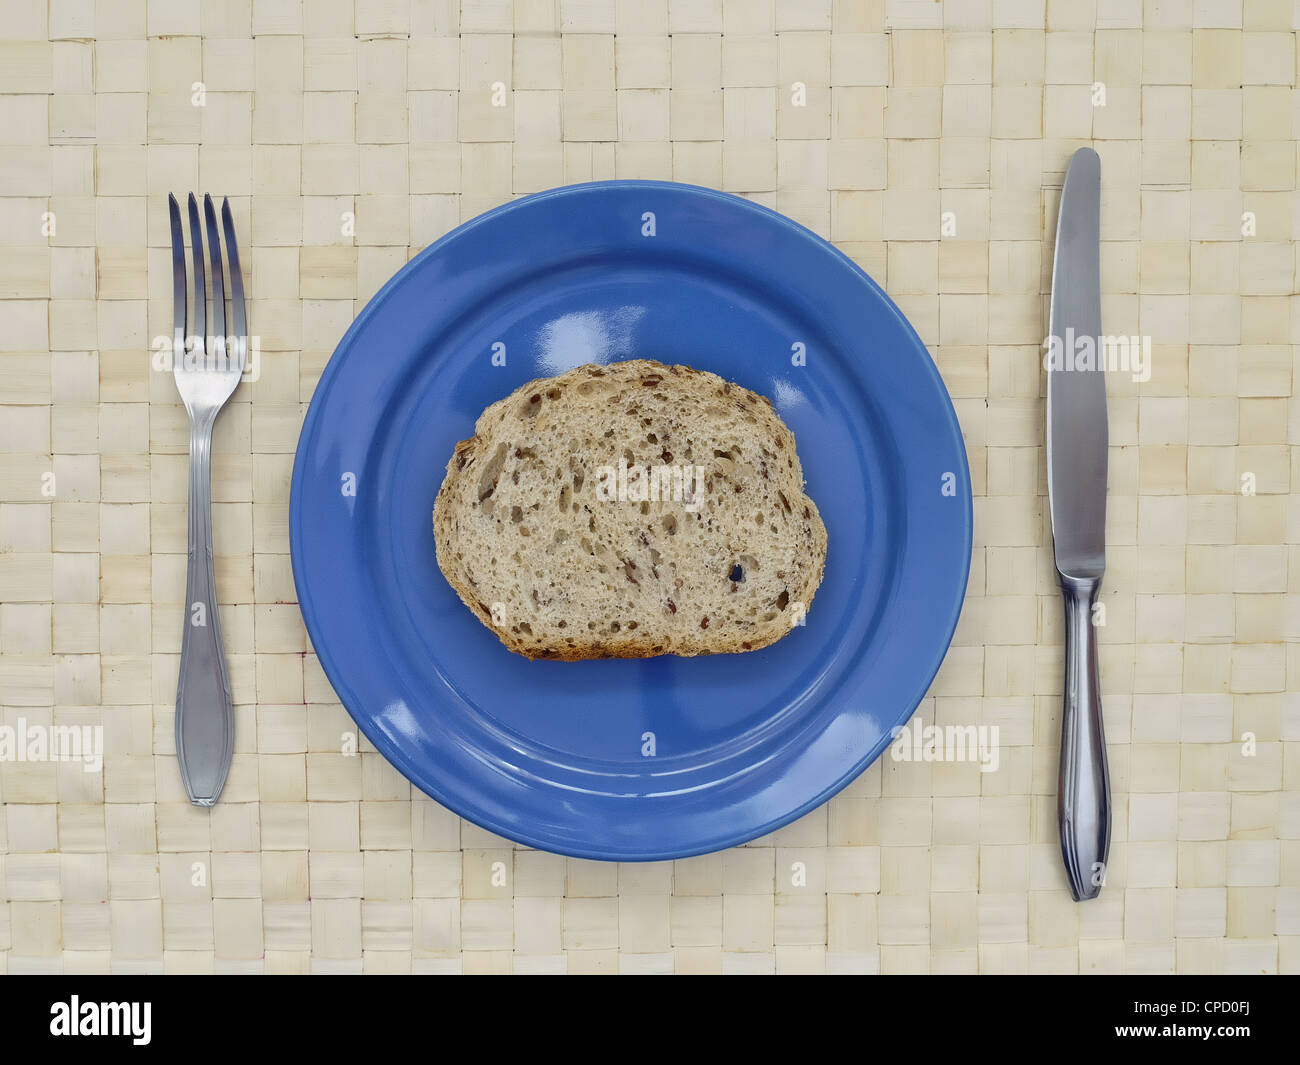 Slice of bread on blue plate with fork and knife Stock Photo